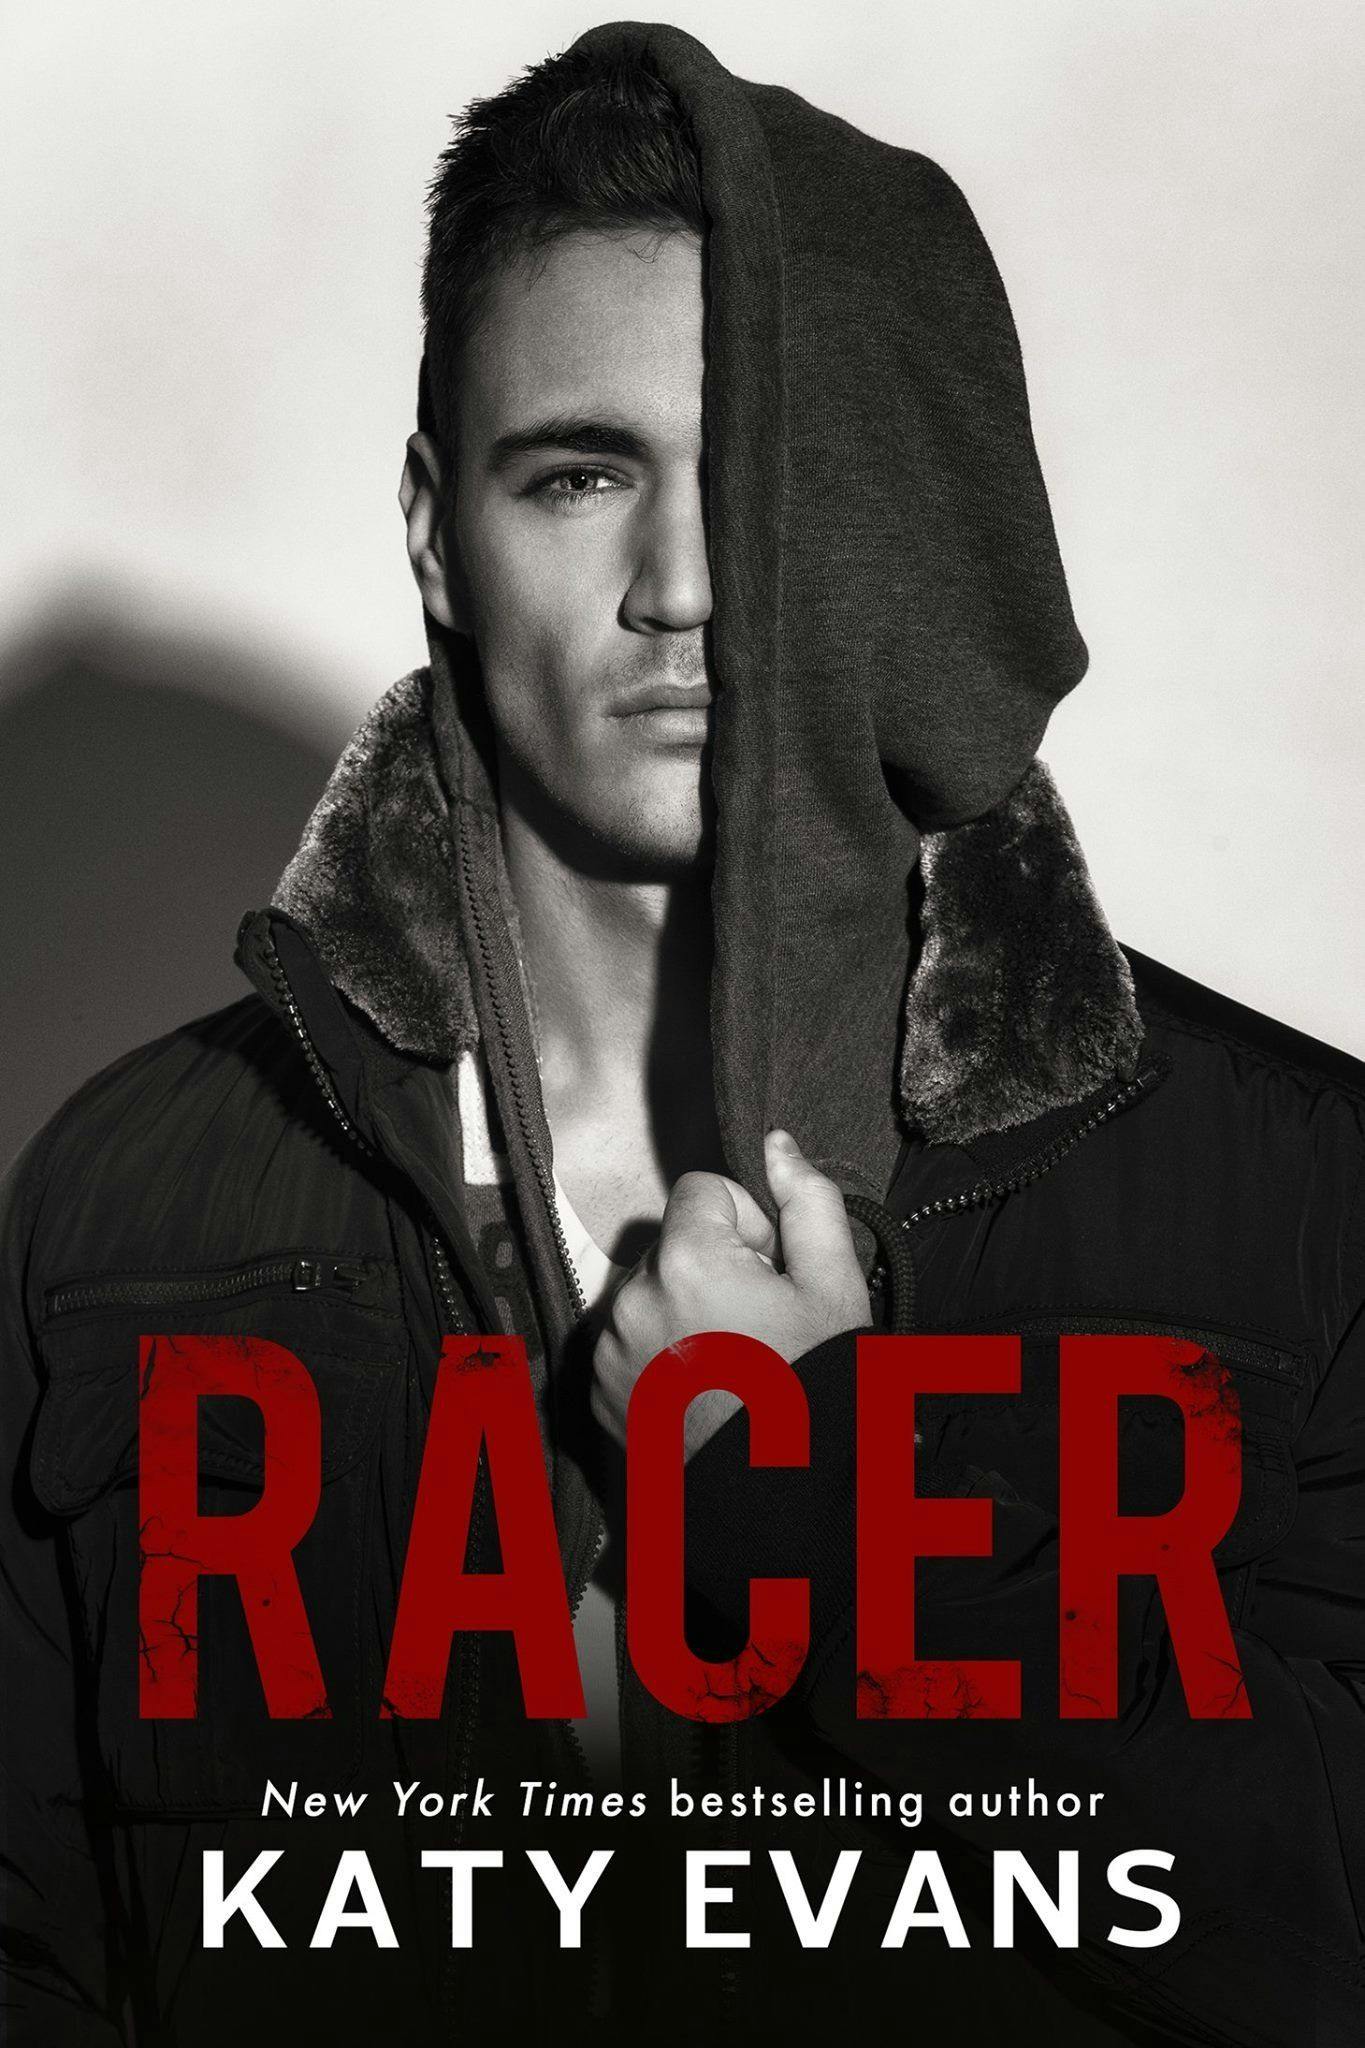 Real #7: Racer